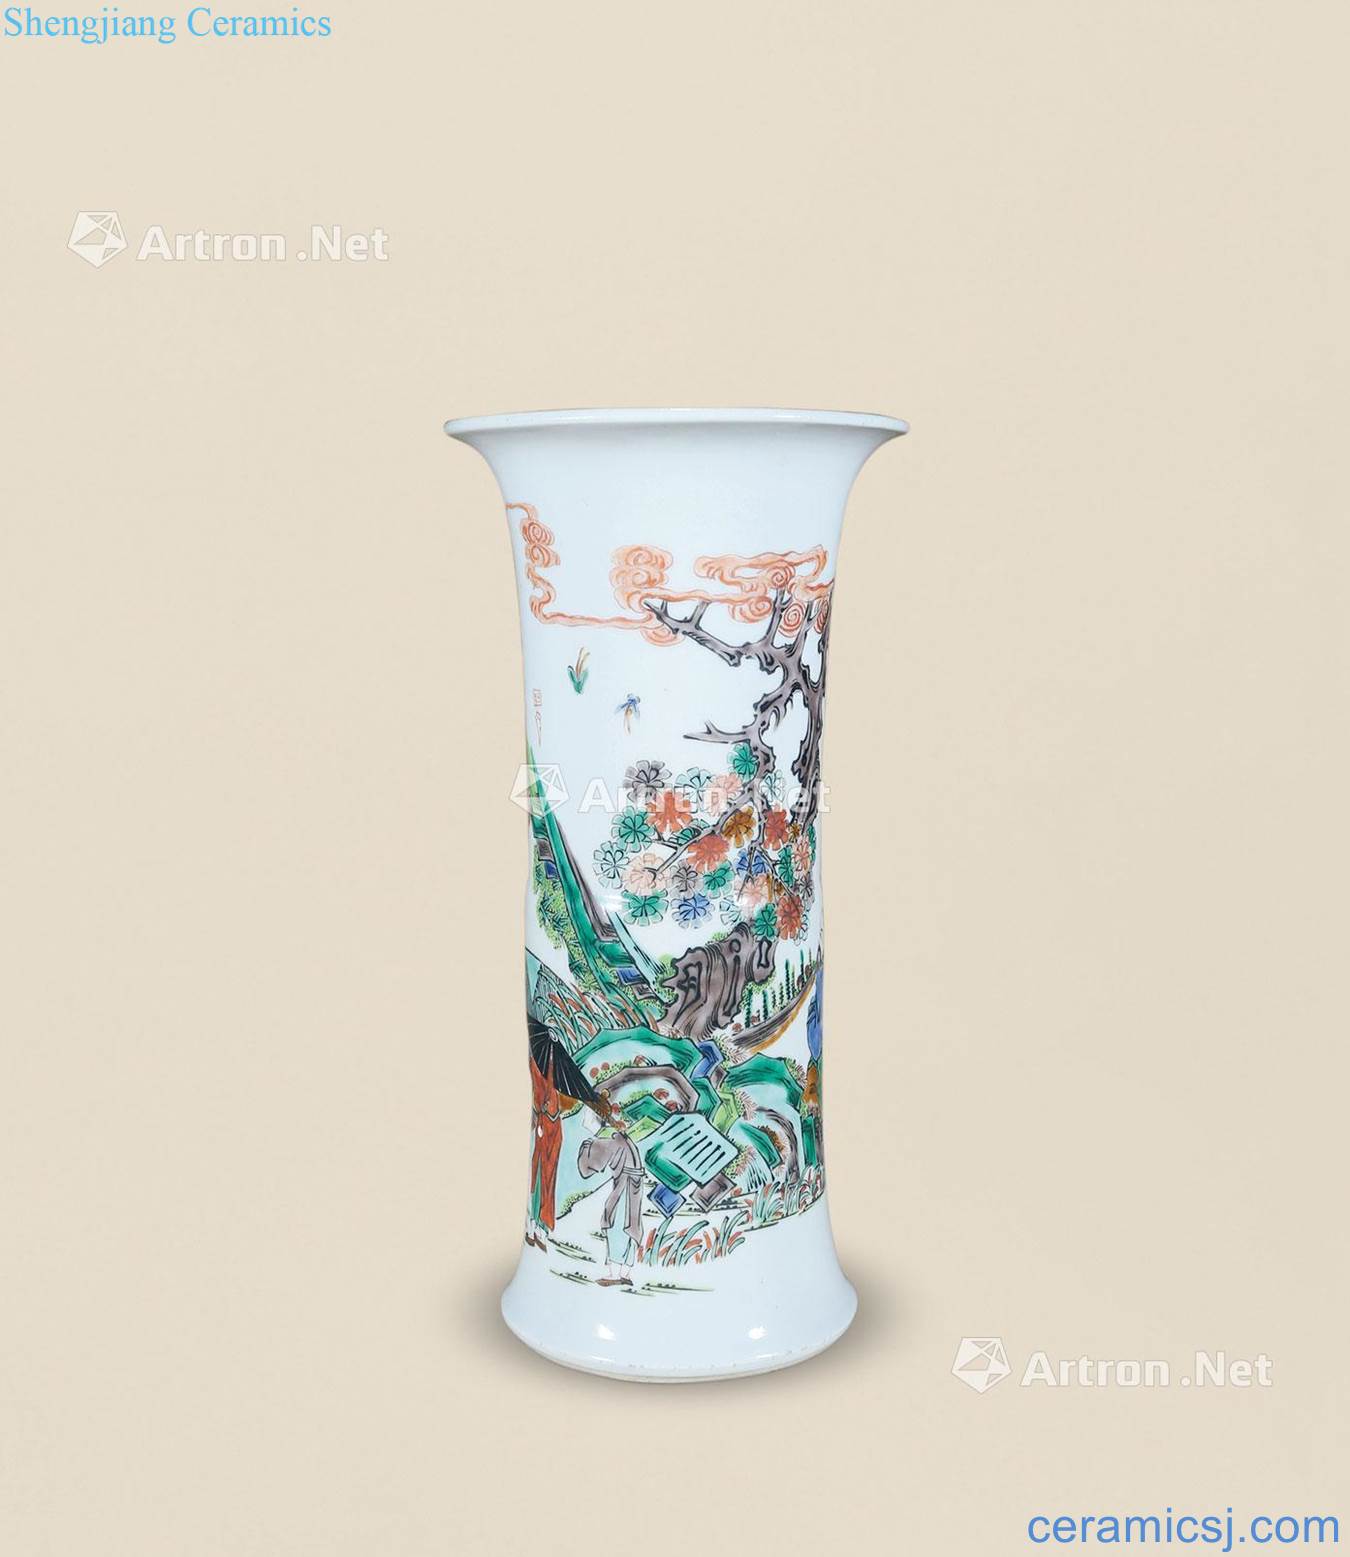 Qing guangxu Flower vase with colorful characters story